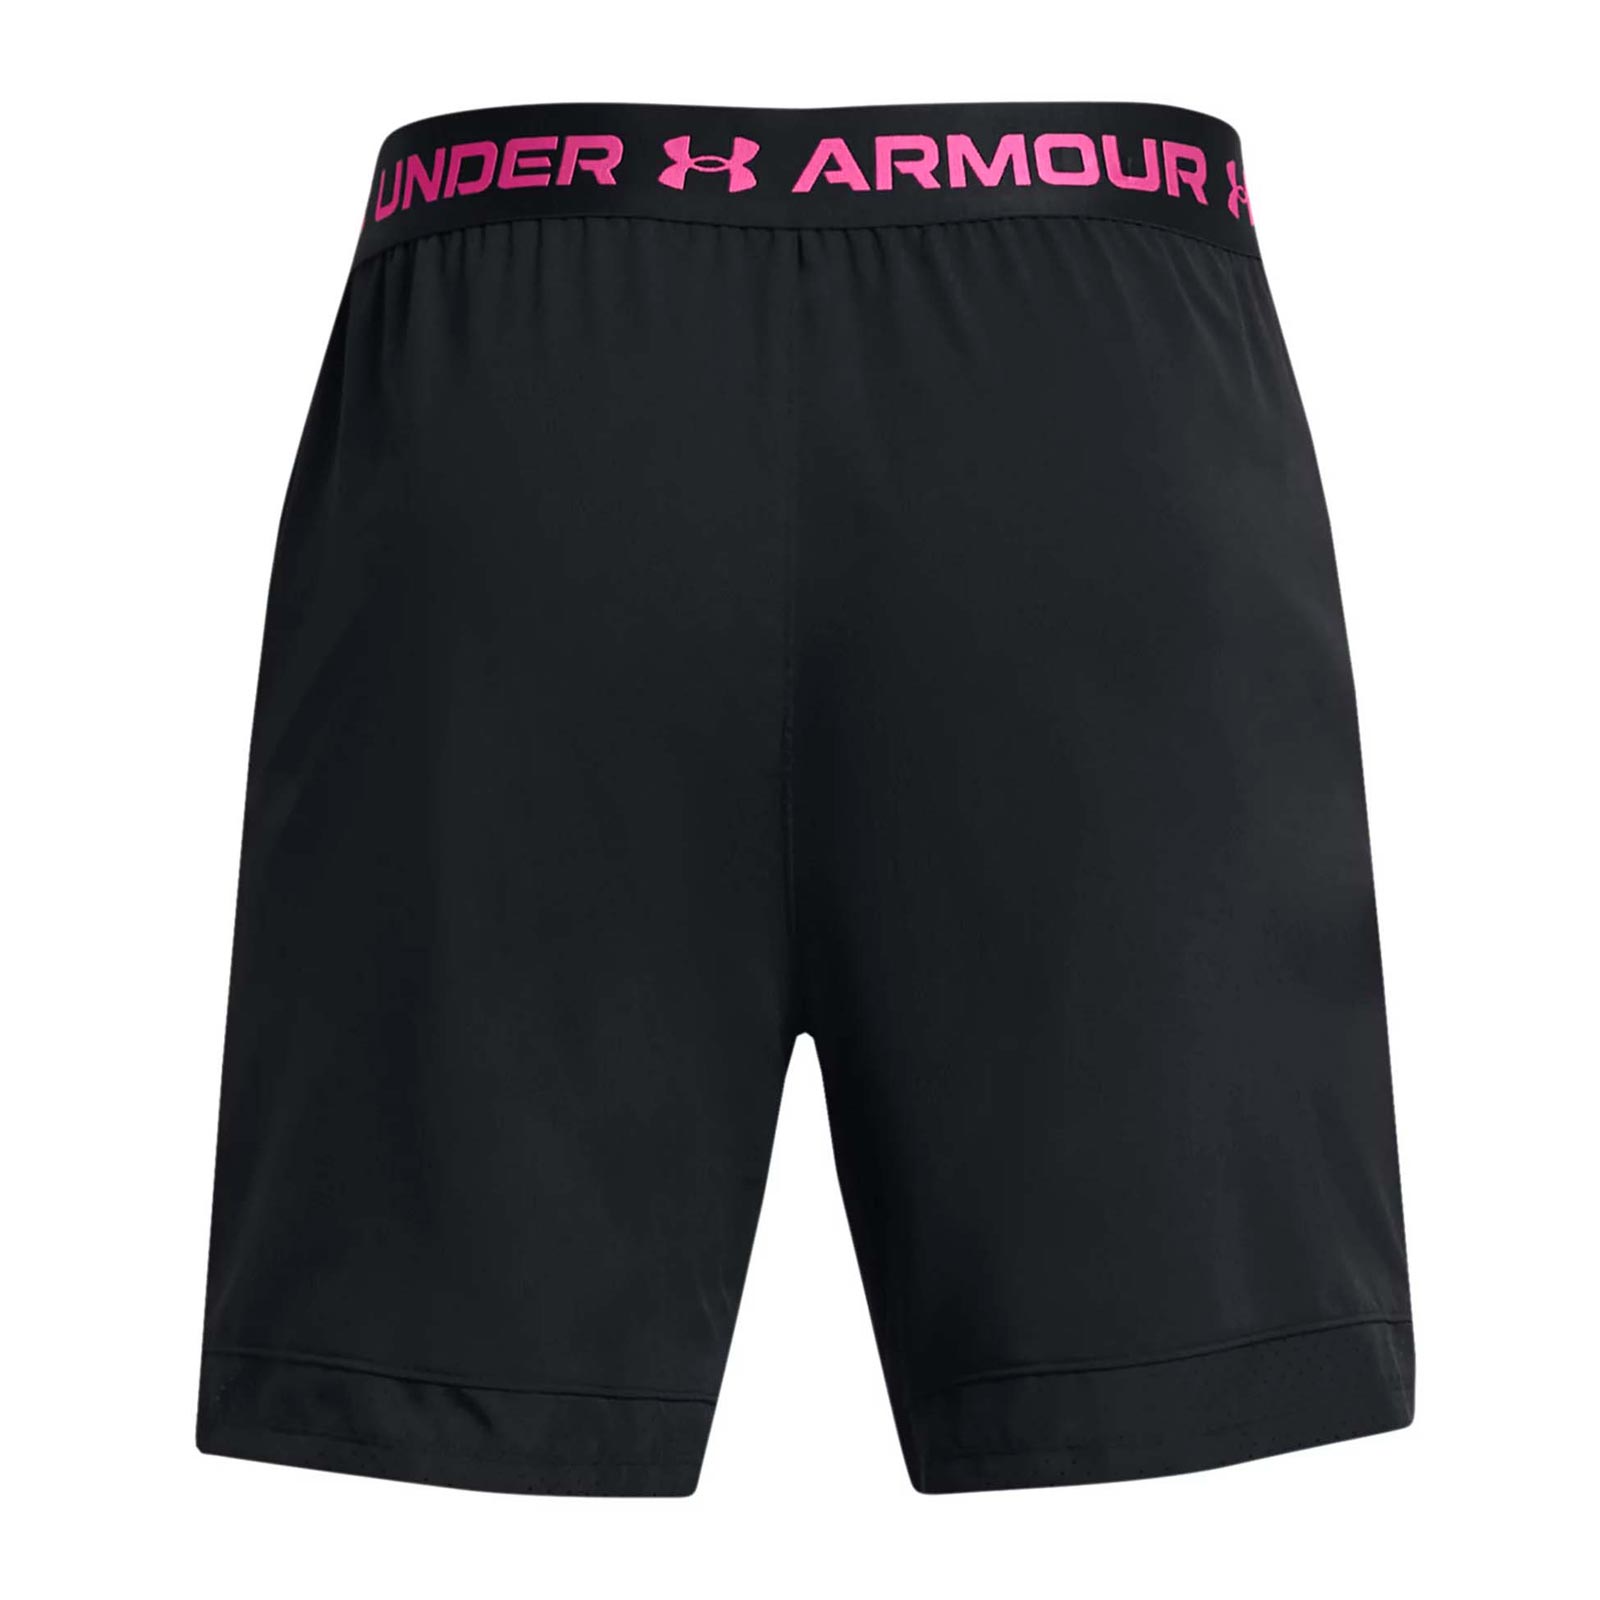 UNDER ARMOUR VANISH WOVEN 6 INCH MENS SHORTS